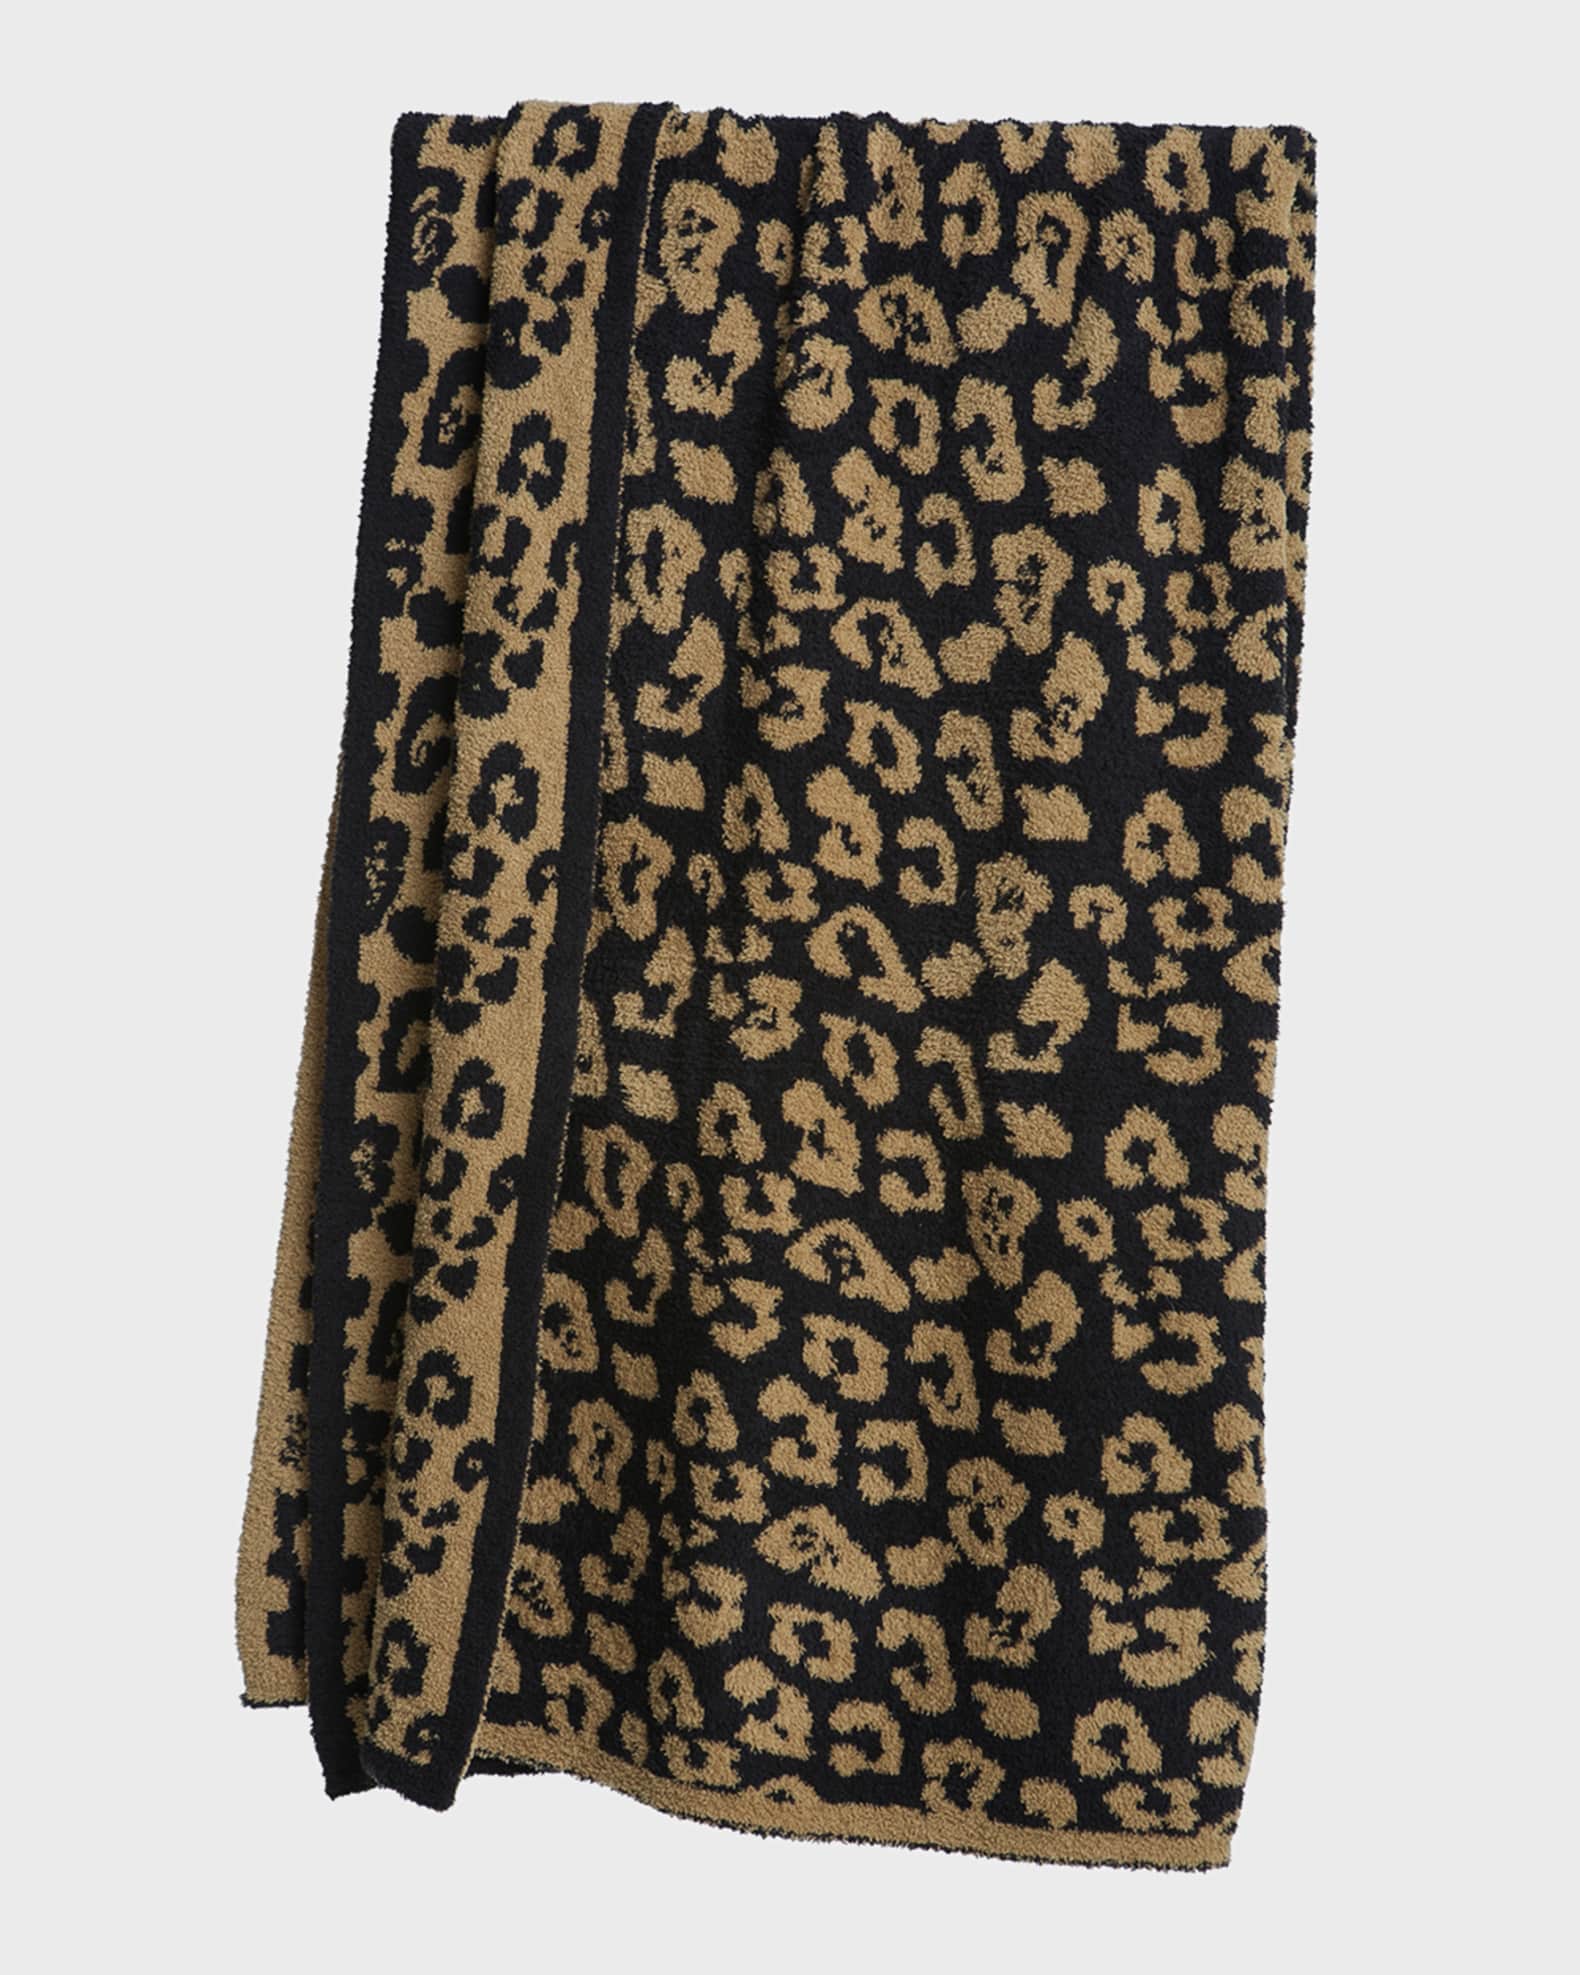 Barefoot Dreams CozyChic Barefoot in the Wild Throw | Neiman Marcus